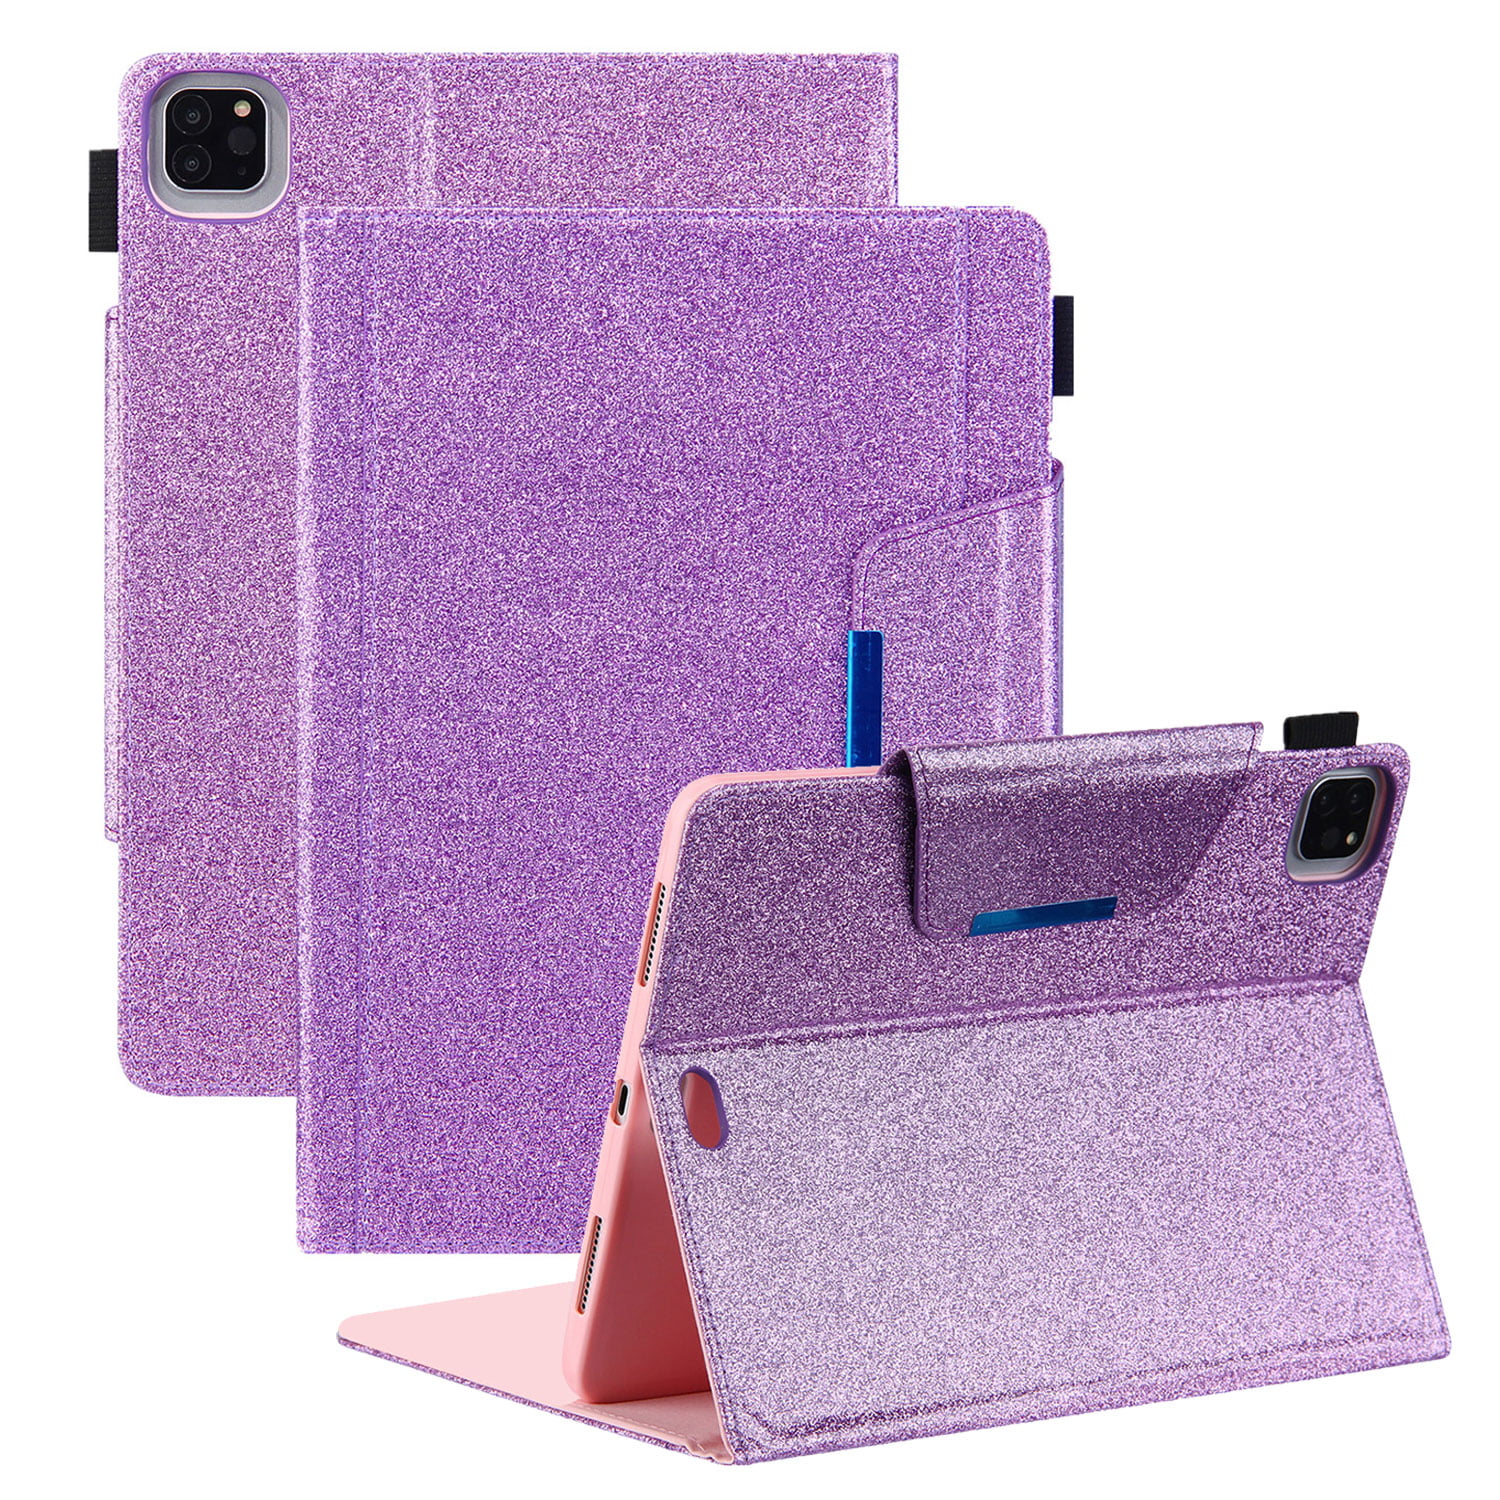 Purple - iPad Air (4th generation) - Cases & Protection - iPad Accessories  - Apple